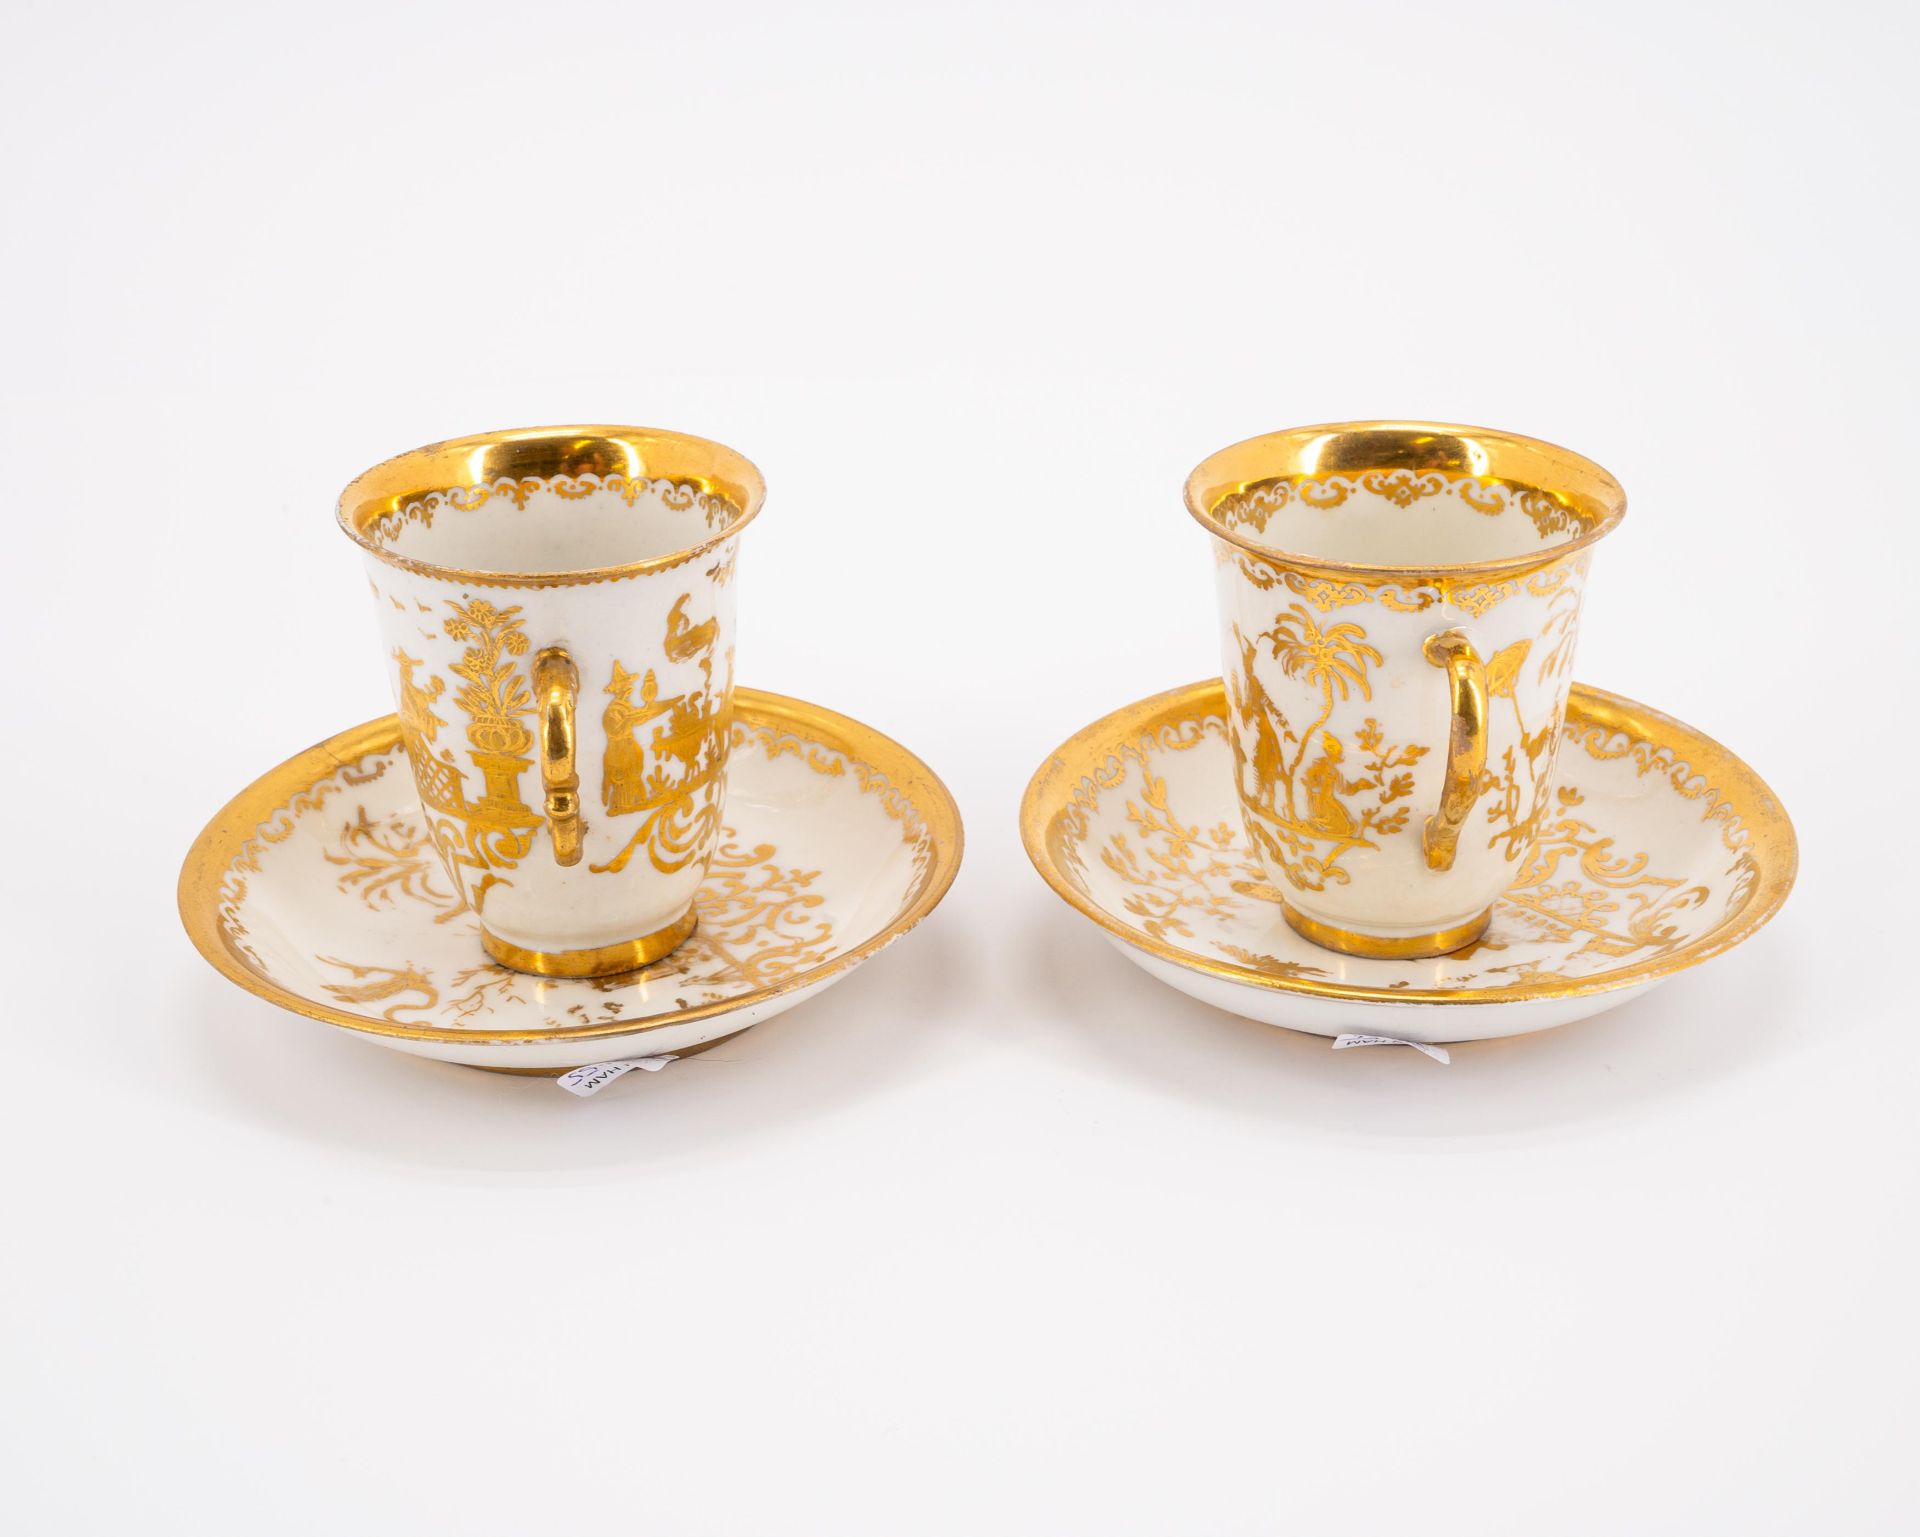 Meissen: TWO PORCELAIN BEAKERS WITH DOUBLE HANDLE AND SAUCERS WITH GOLDEN CHINOISERIES - Image 4 of 6